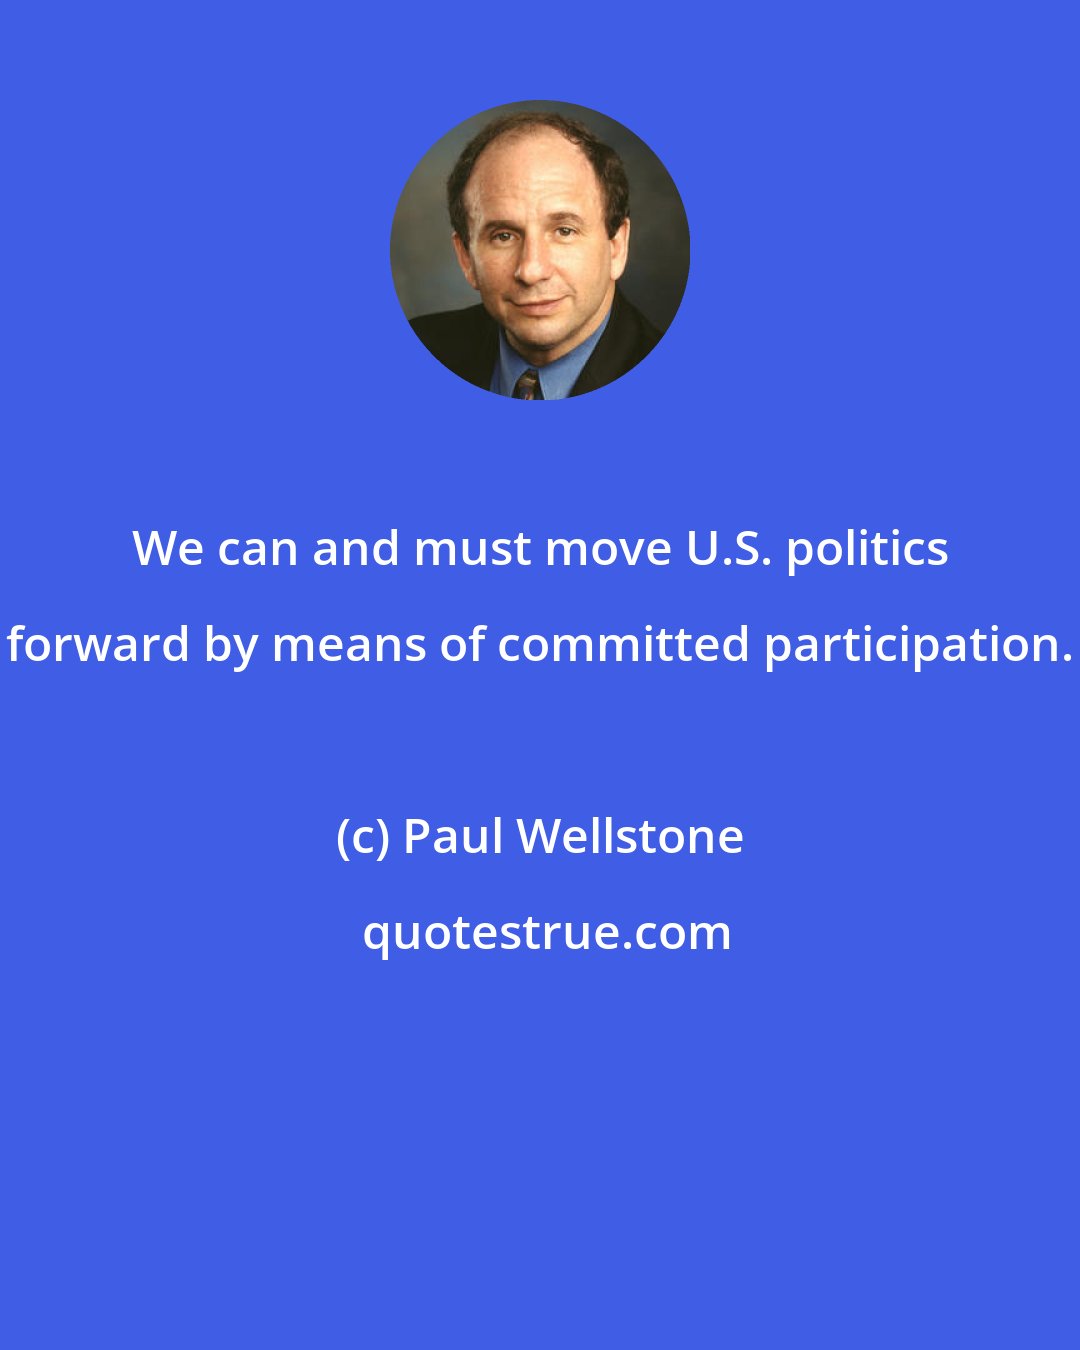 Paul Wellstone: We can and must move U.S. politics forward by means of committed participation.